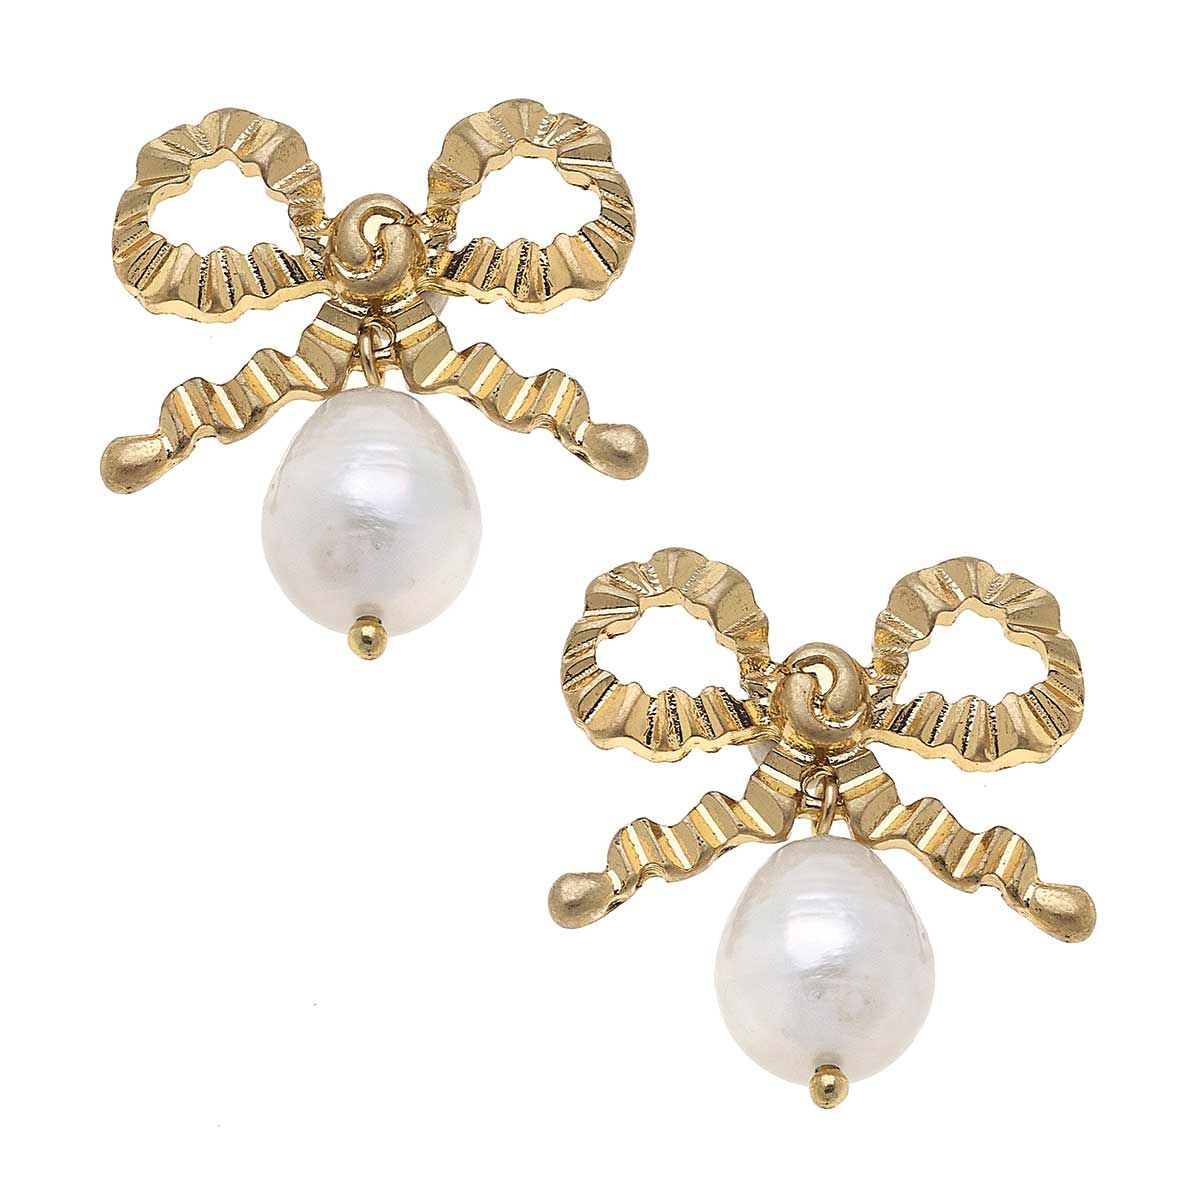 Kate Bow & Pearl Drop Earrings in Worn Gold | Palm Beach Collective